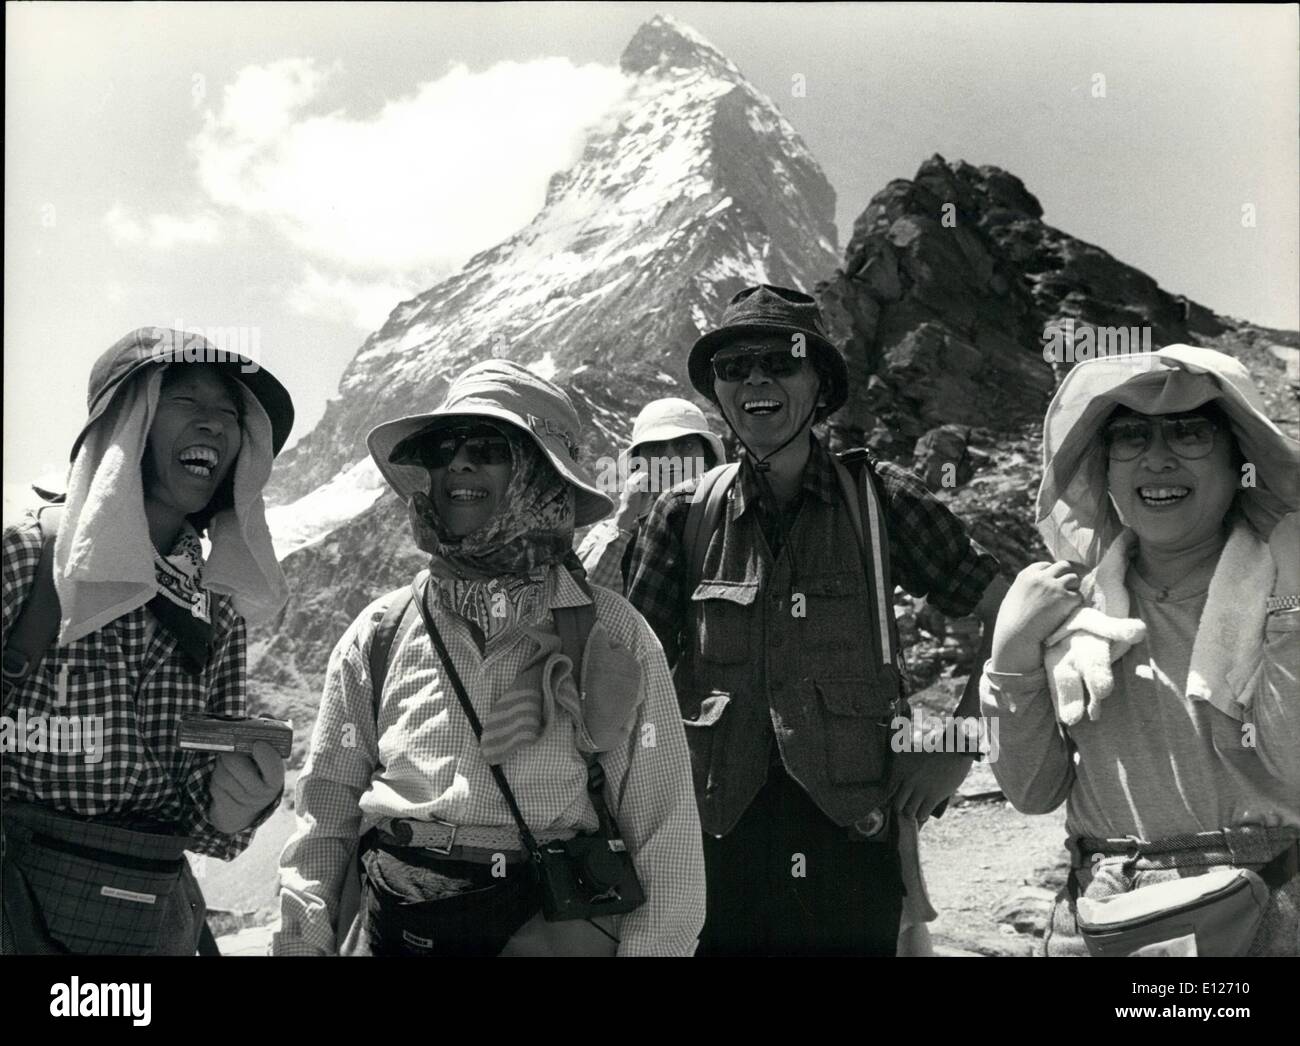 Jul. 07, 1990 - Jubilation of 125 years since first ascent of Matterhorn: Tourists from Japan are seen at the Matterhorn all over the year, also at the day of jubilation. Stock Photo